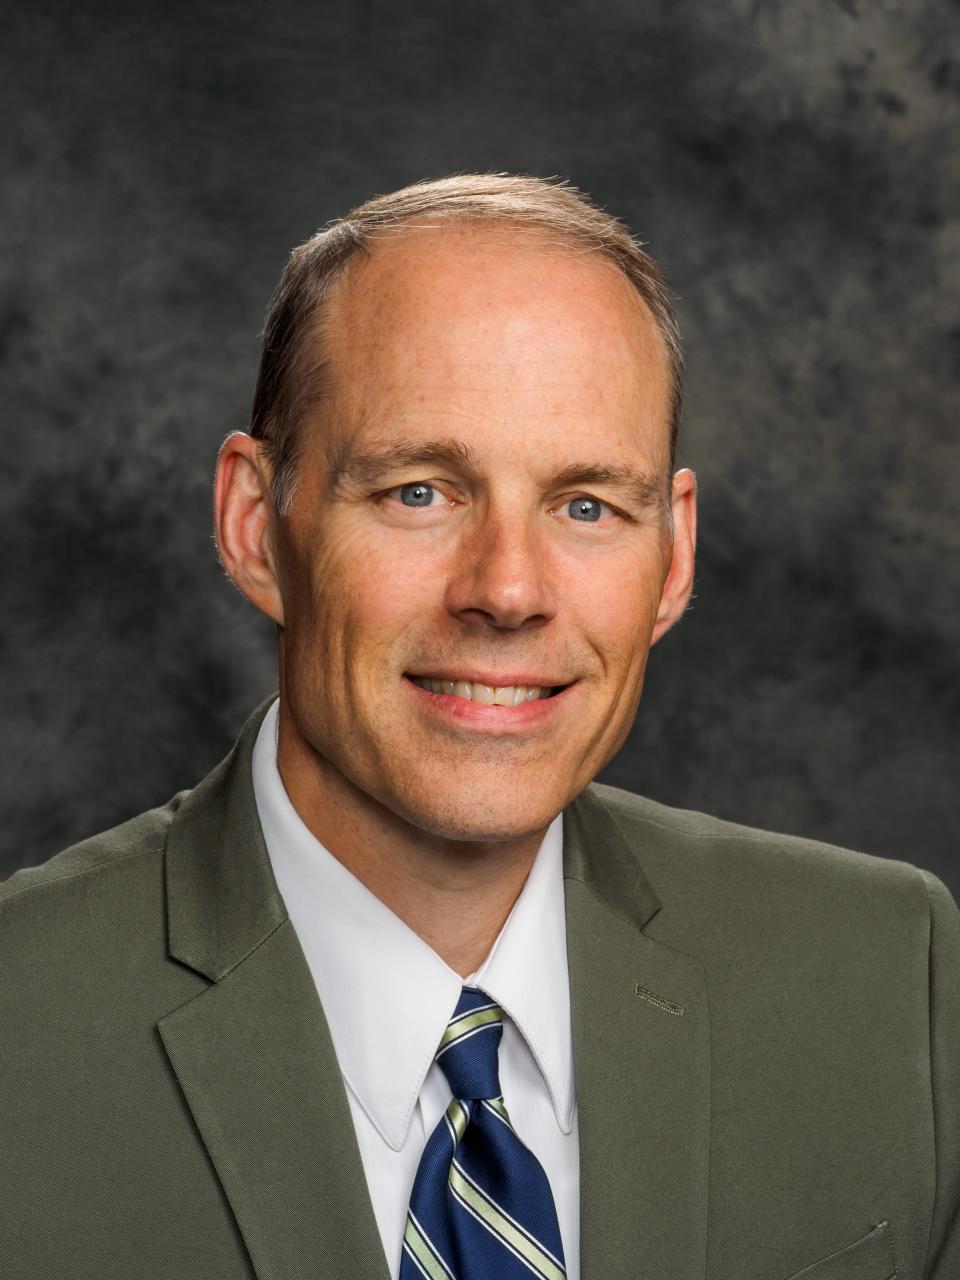 Todd F. Hoadley is the superintendent and CEO of Tolles Career & Technical Center.